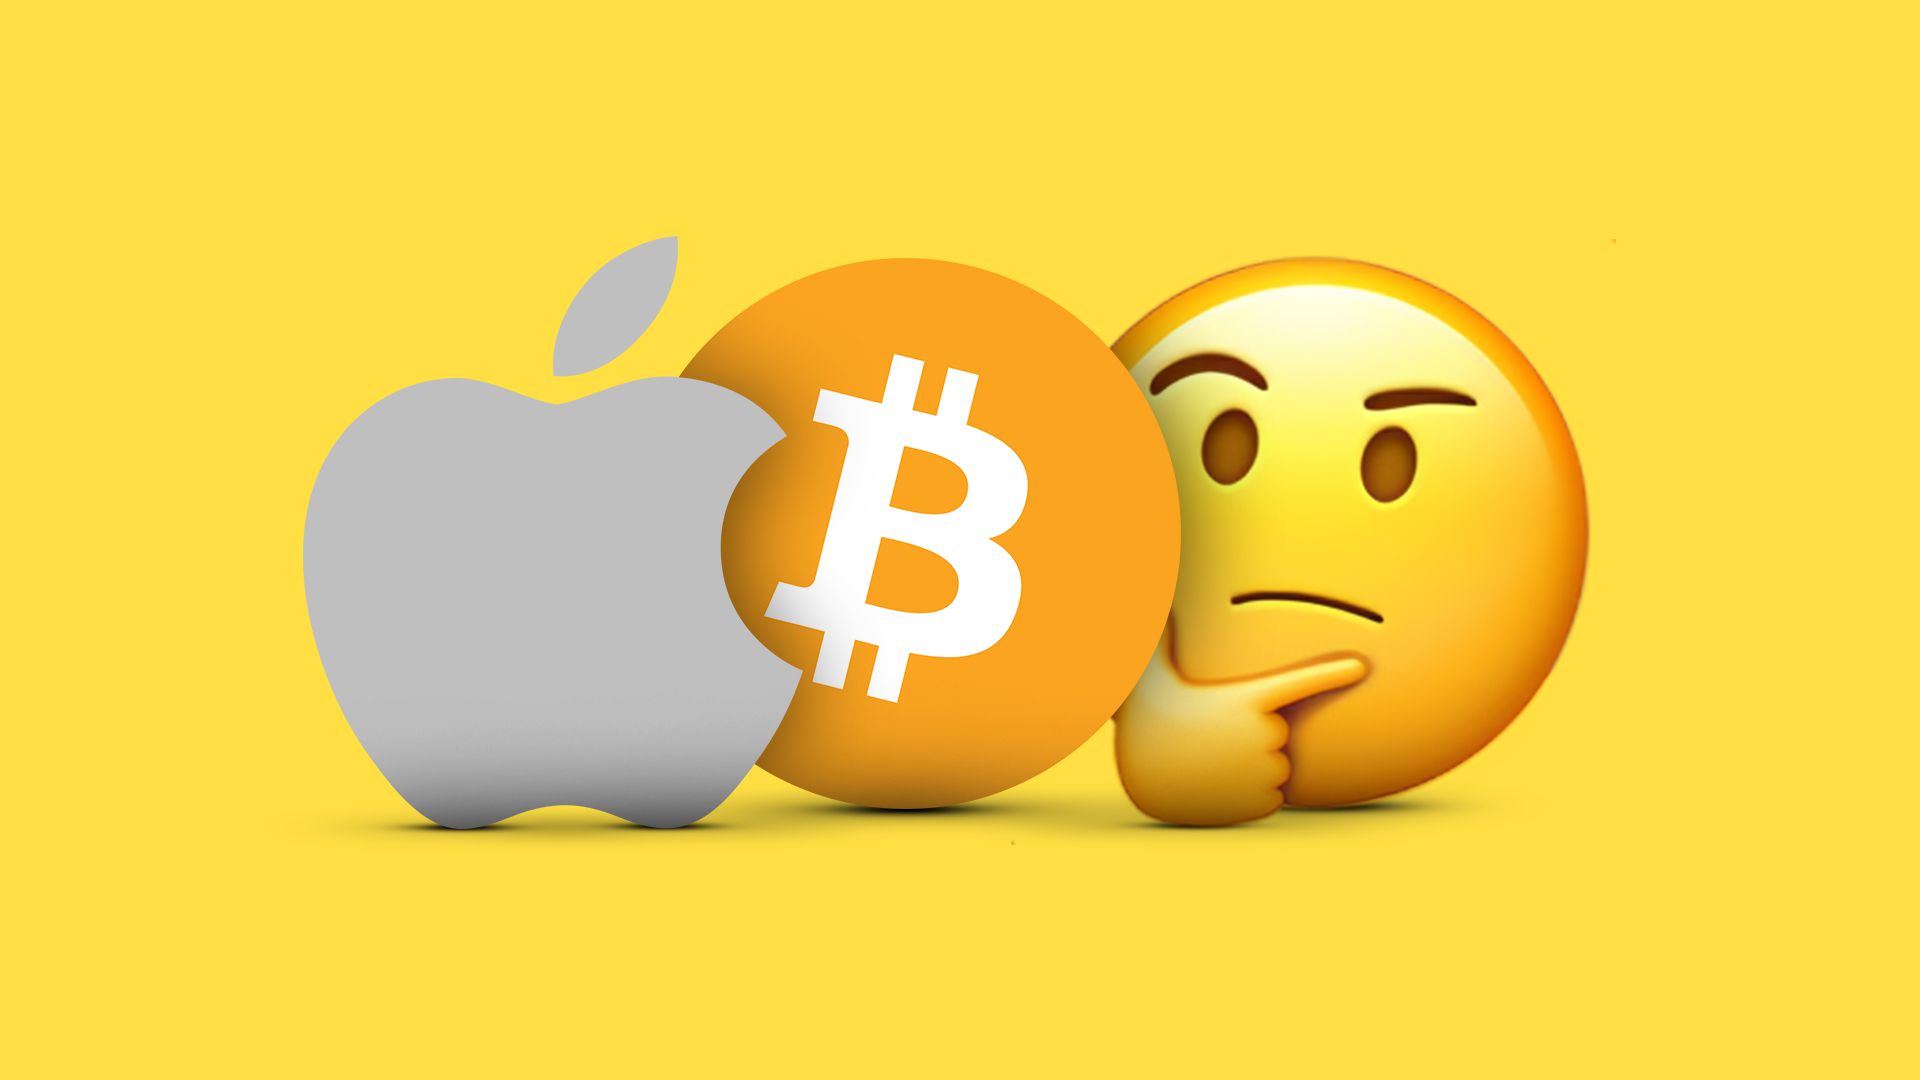 Apple Has Included Bitcoin Whitepaper in Every Version of macOS Since 2018 - macrumors.com